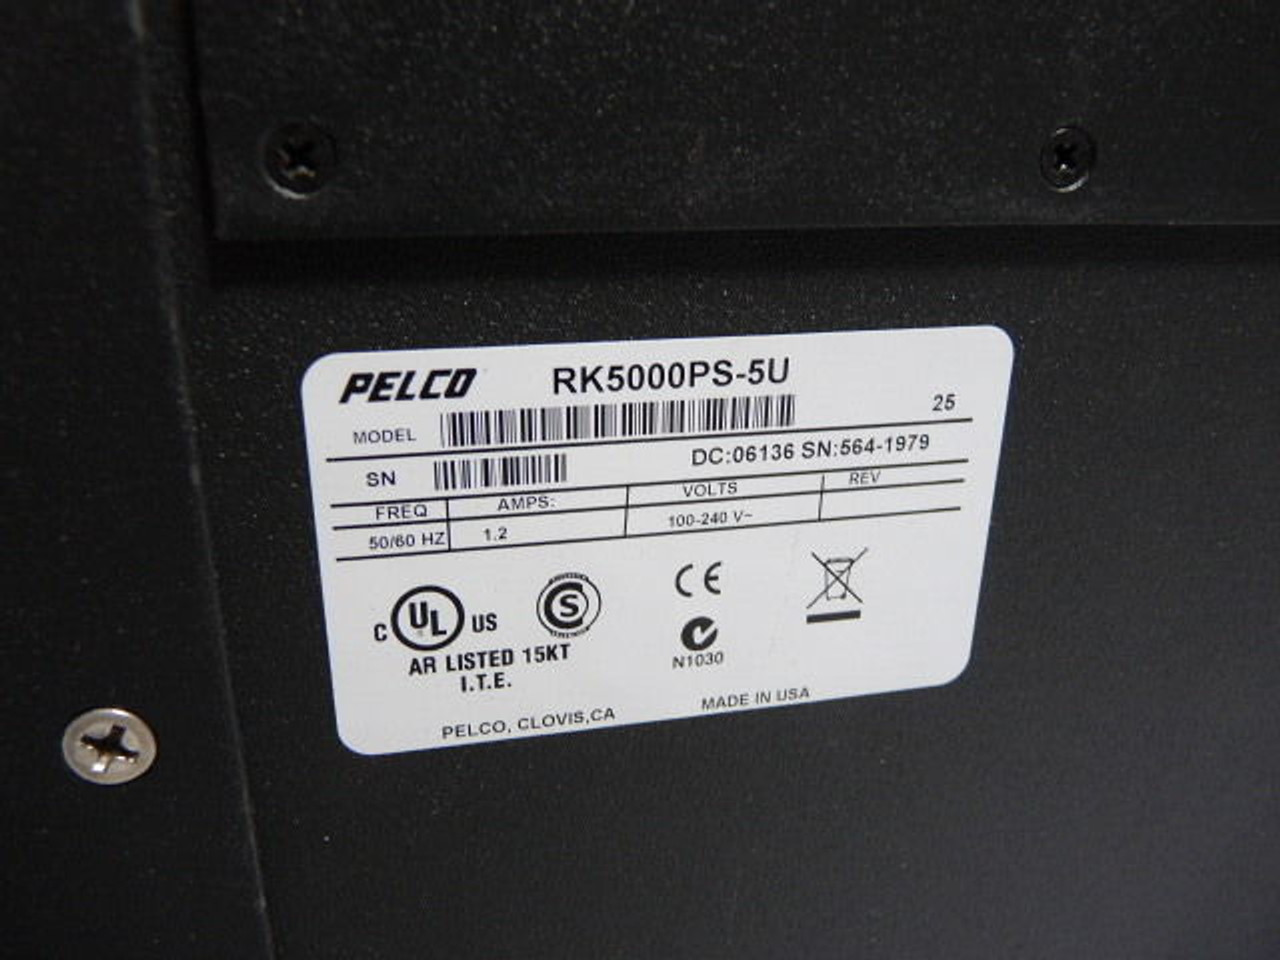 Pelco RK5000PS-5U Chassis Rack 10" 12 Slot NO POWER SUPPLY INCLUDED USED